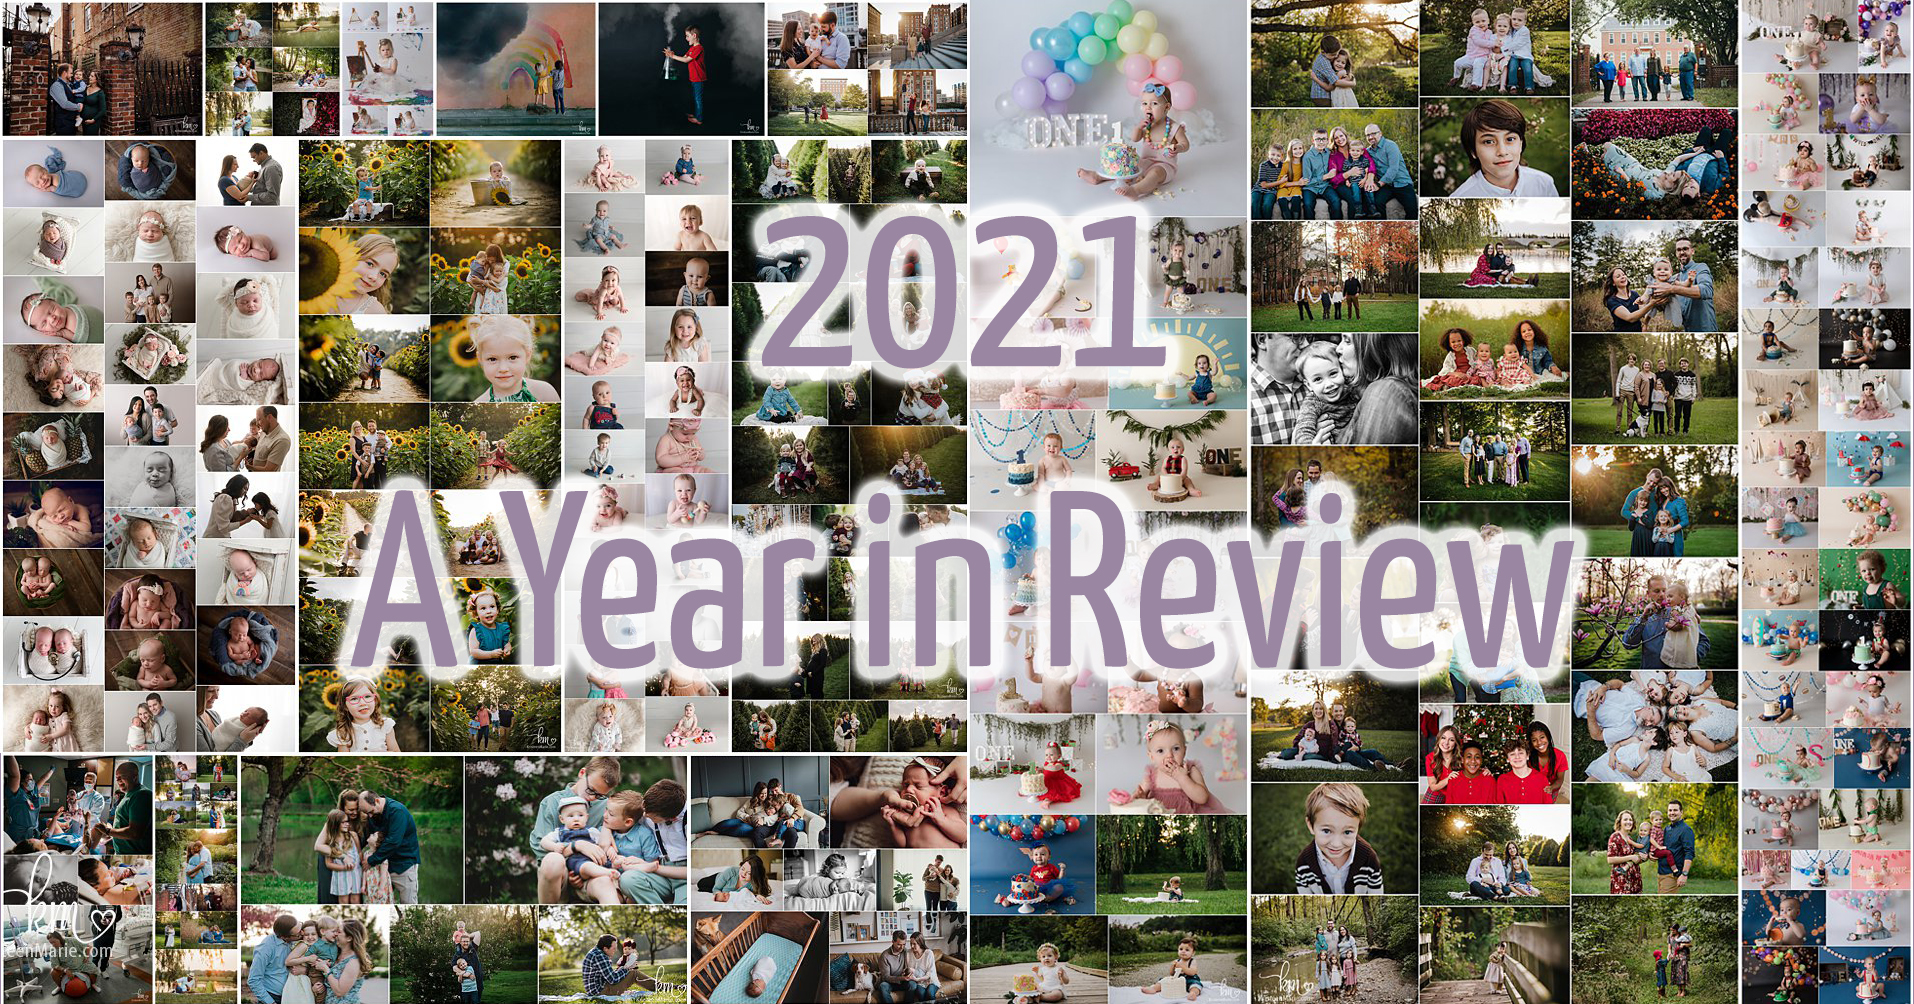 2021 Yearly Review - Photography